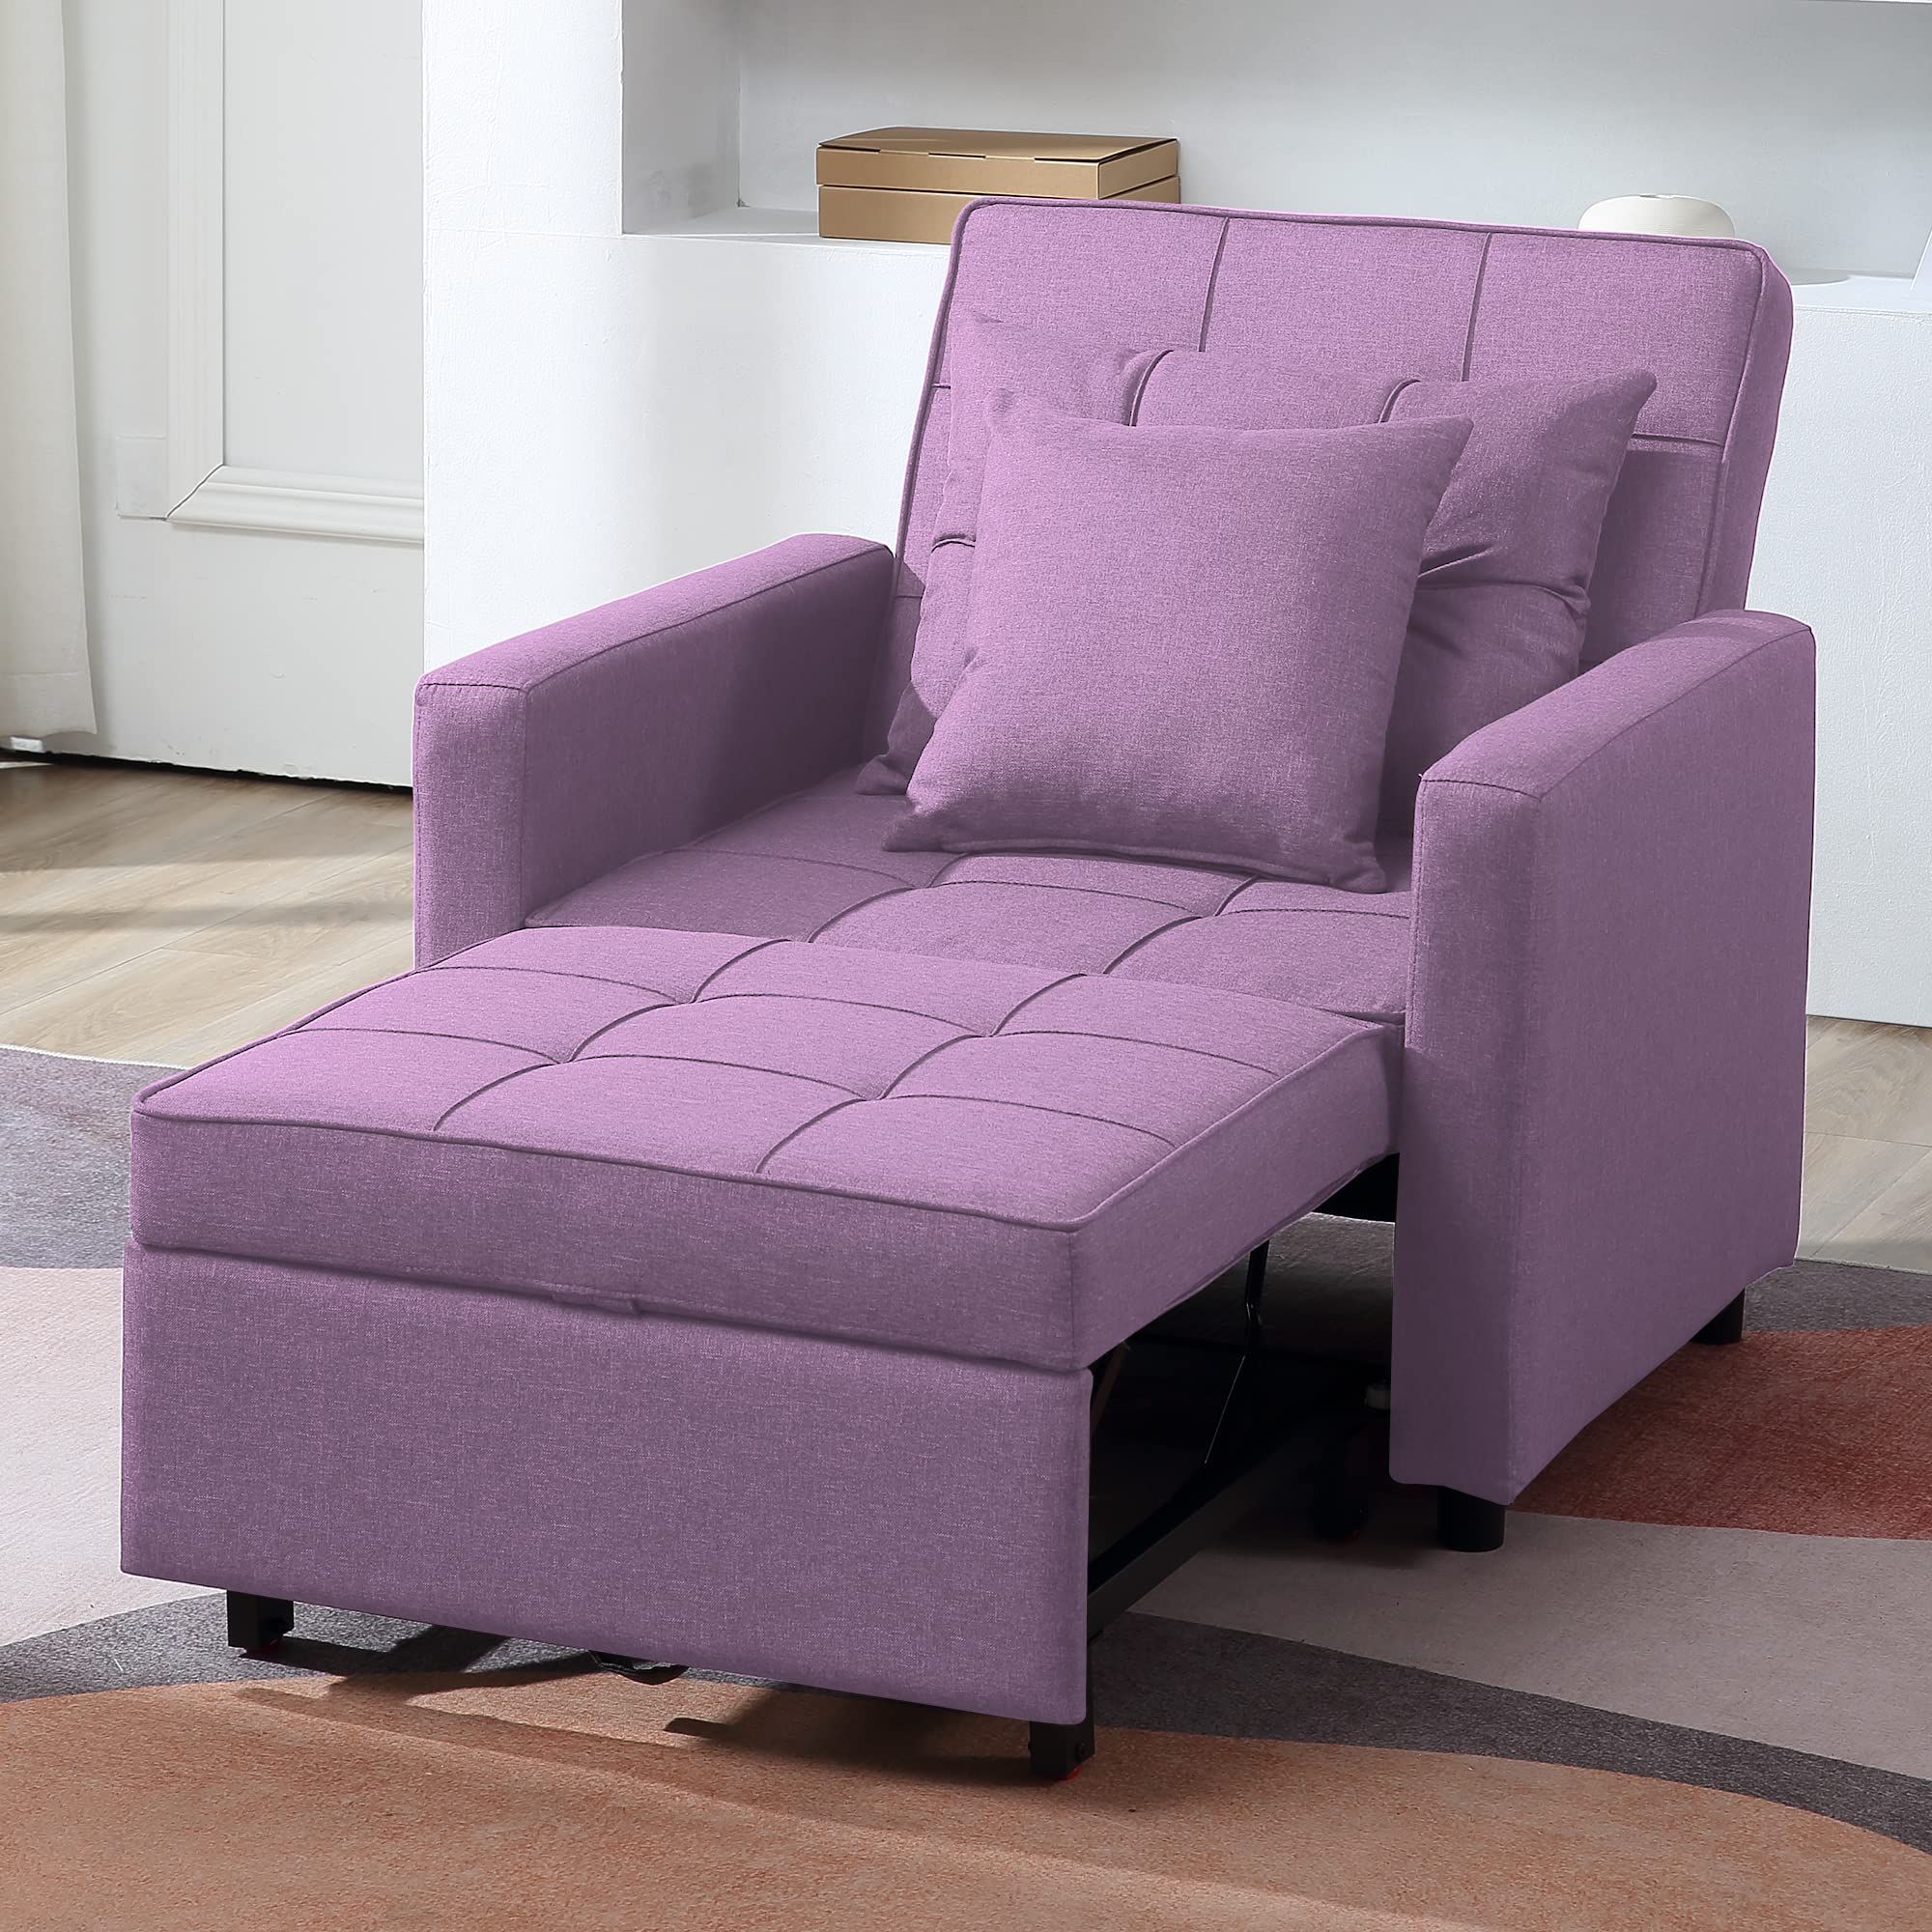 Stylish And Welcoming Single Chair Sofa Bed